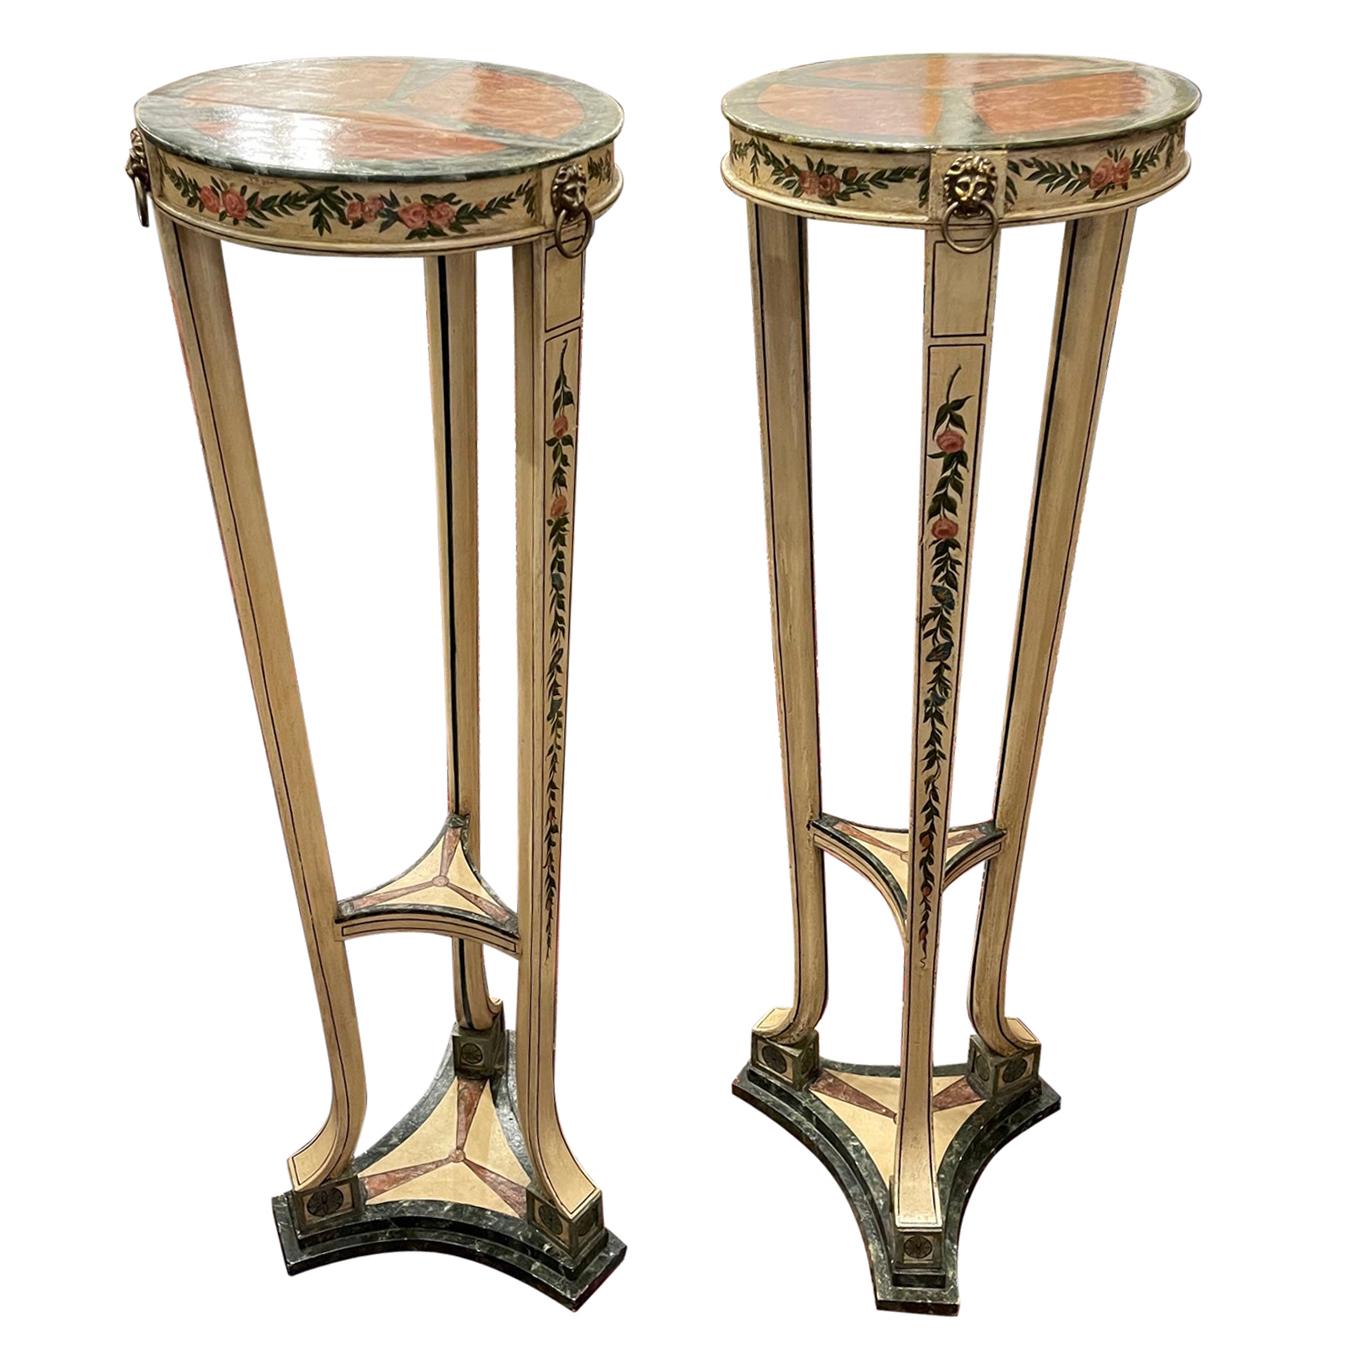 Pair of Torchère or Pedestals Painted, George III, circa 1800